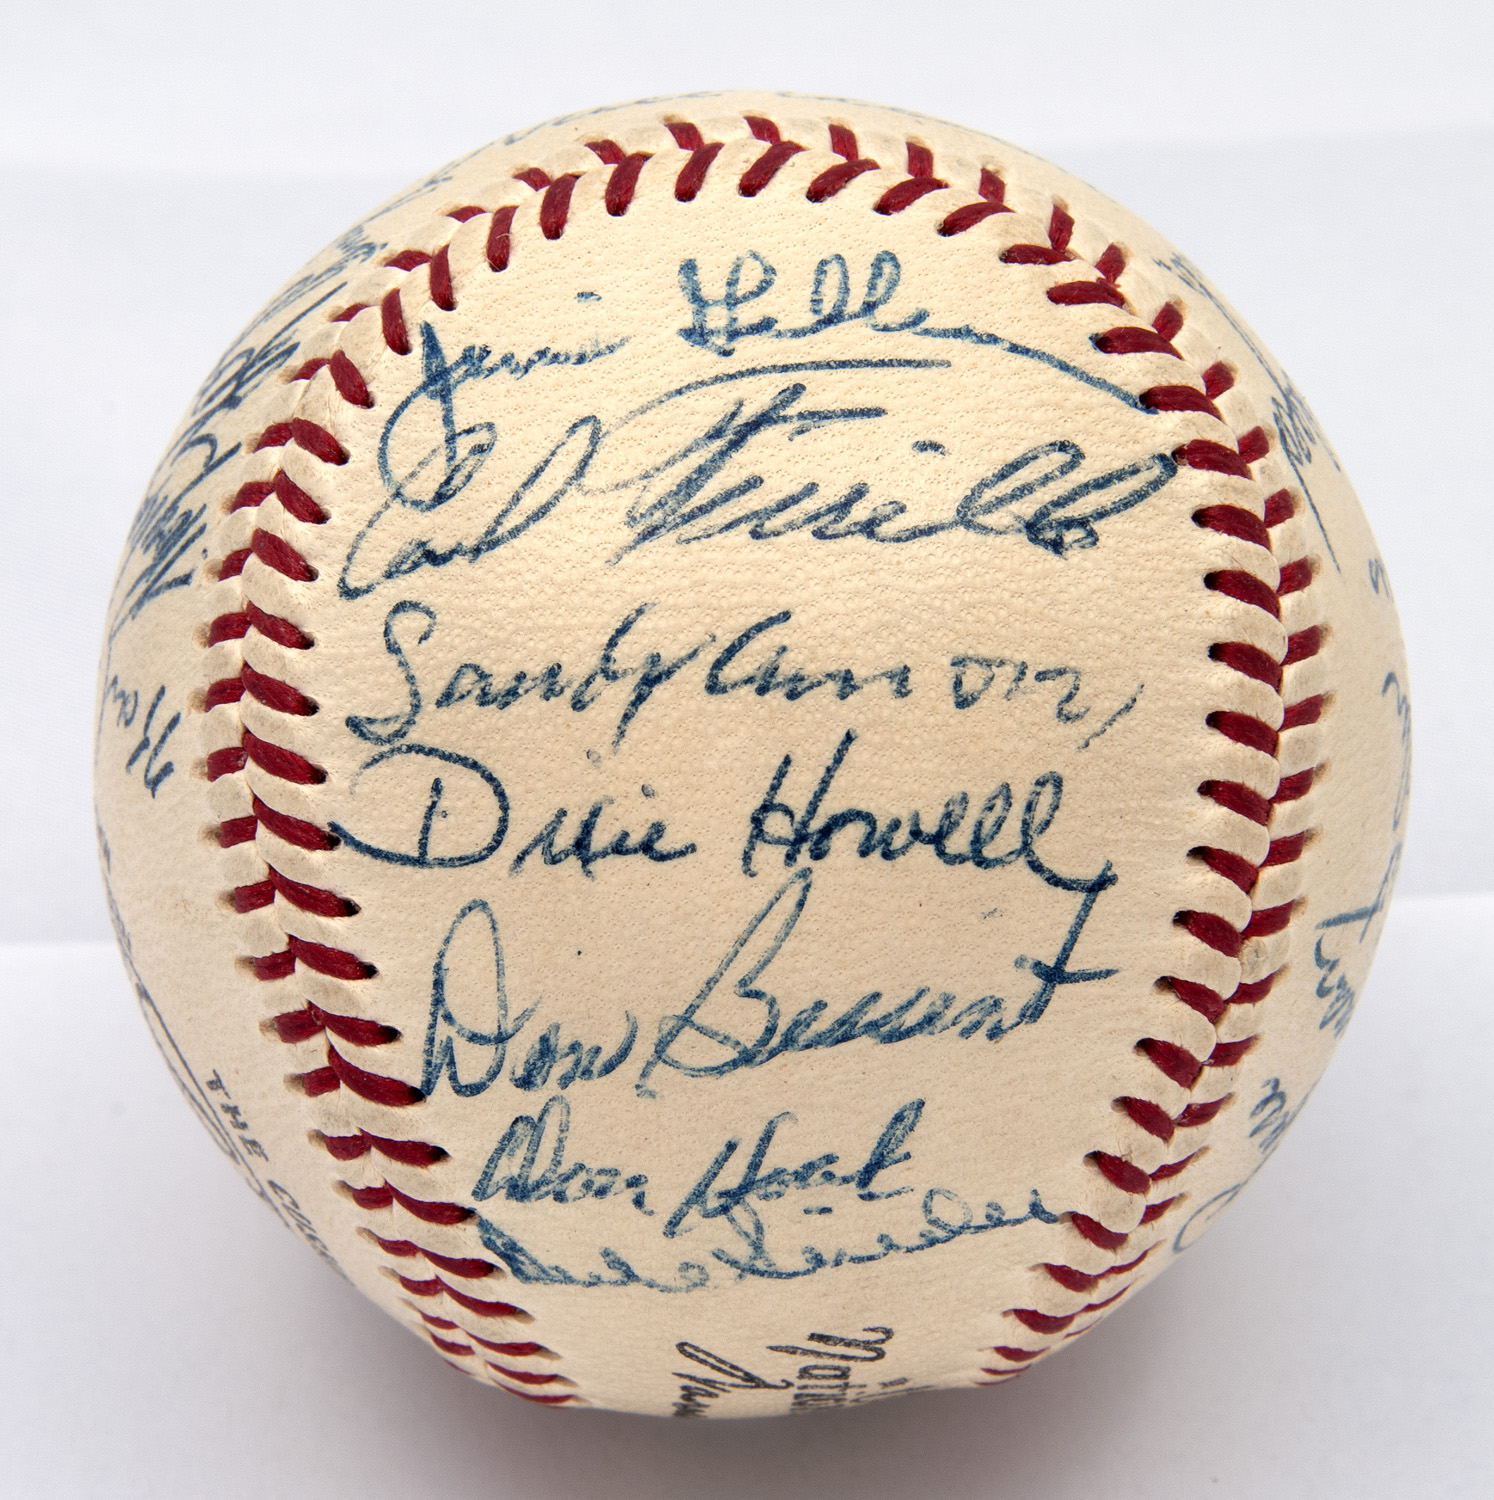 Lot Detail 1955 Brooklyn Dodgers World Champion Team Signed Onl Giles Baseball With Jackie